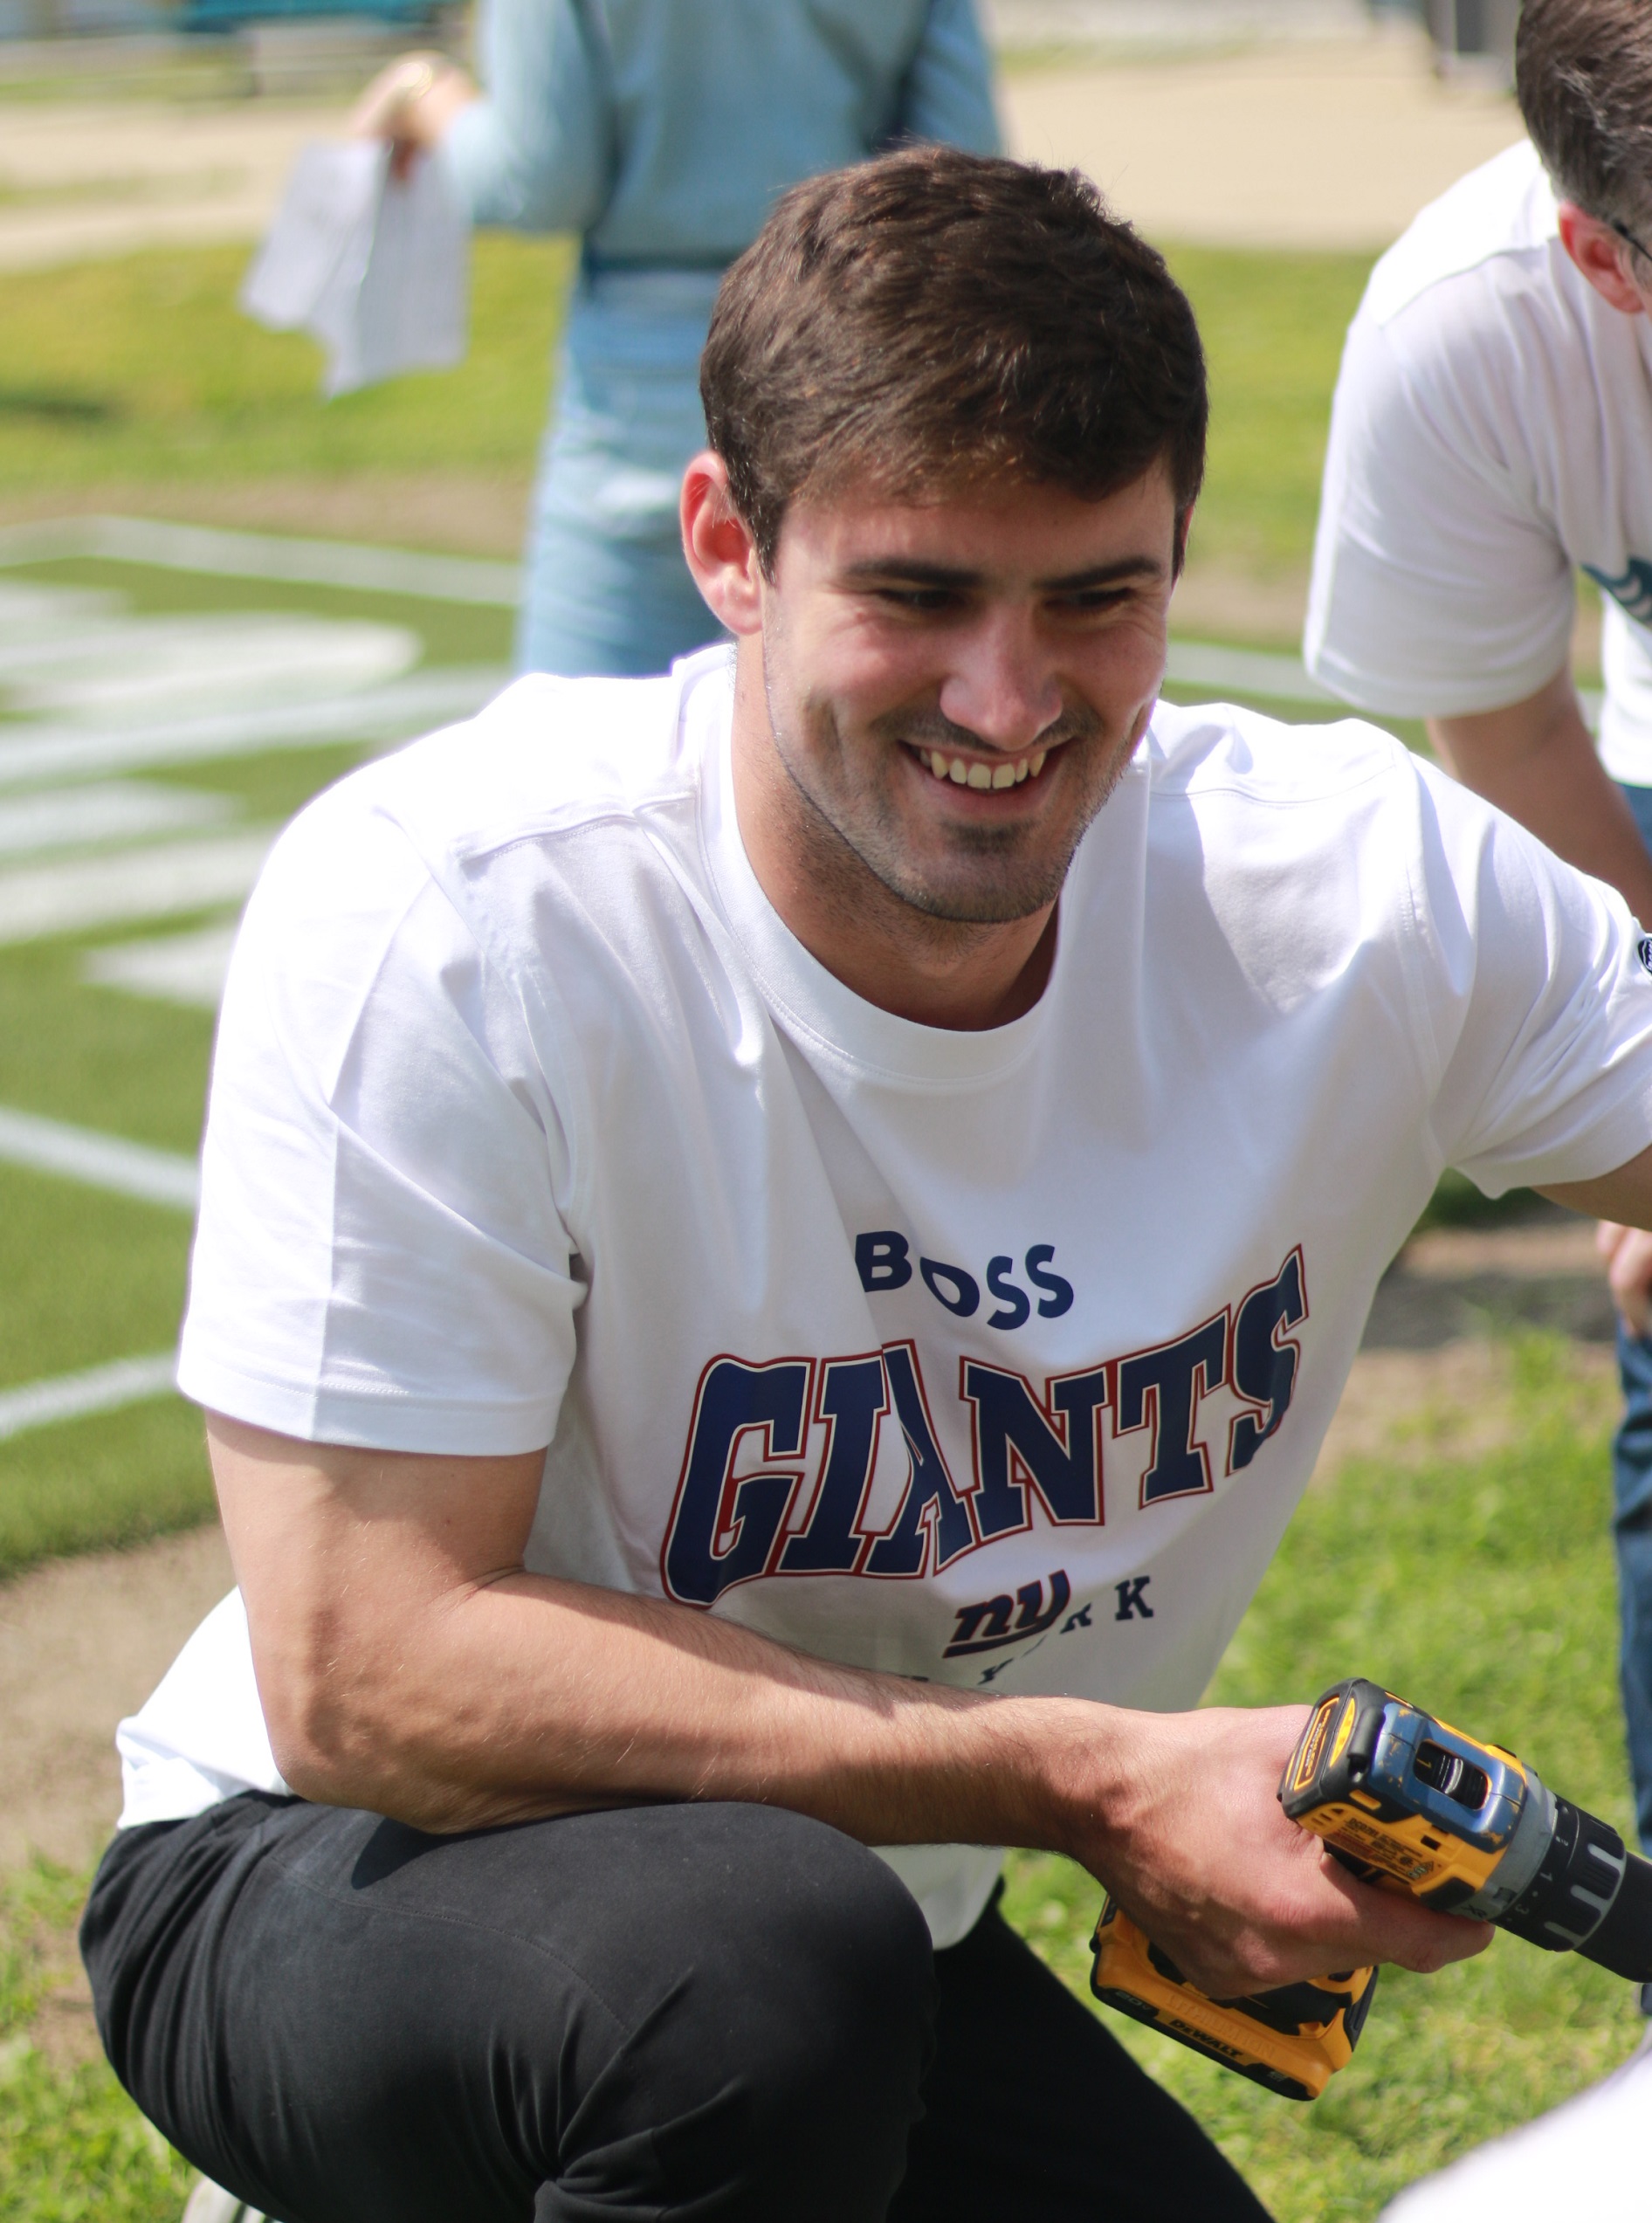 NY Giants Quarterback Daniel Jones volunteers for a community build with Hugo BOSS at the Child Center Residential Treatment Facility in Brooklyn.